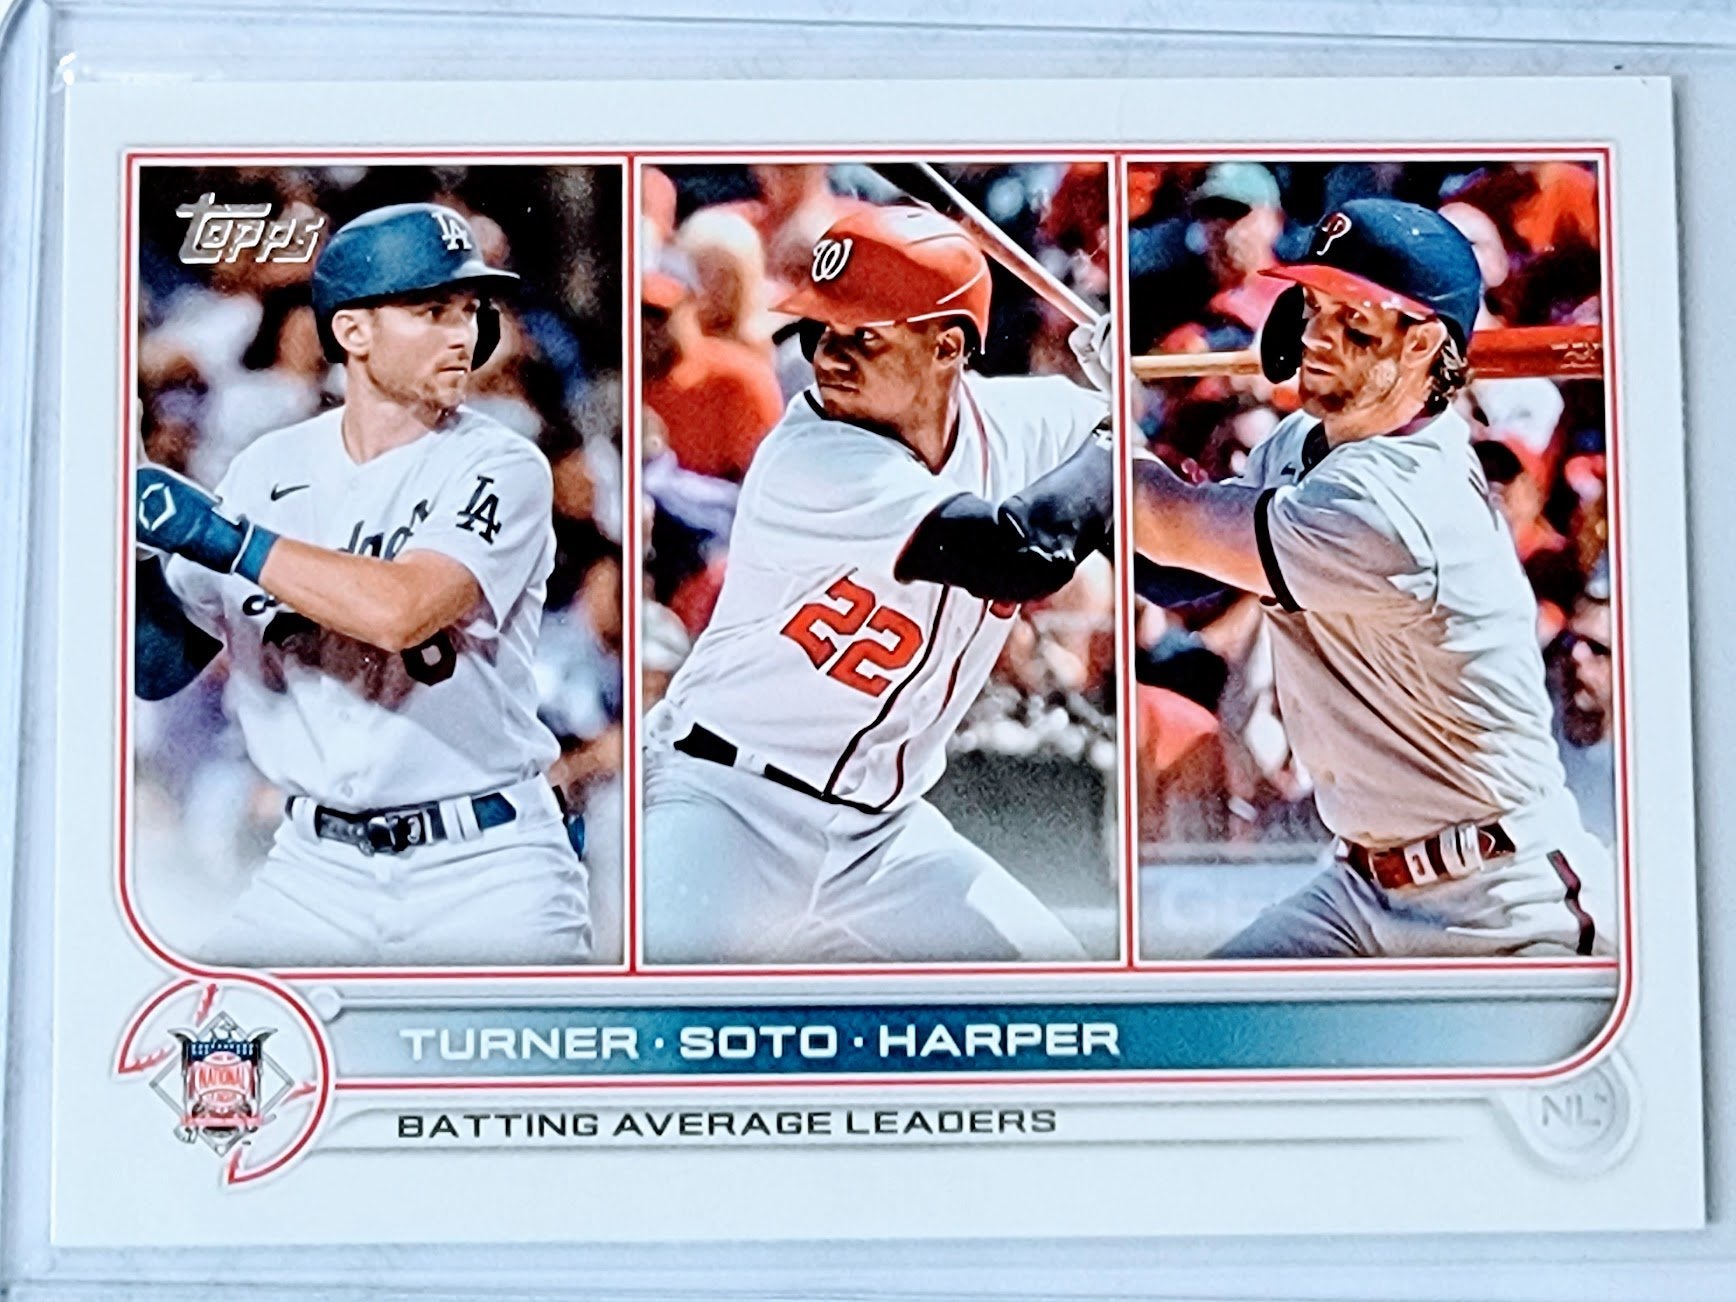 2022 Topps NL Batting Average Leaders Turner, Soto & Harper Baseball Trading Card GRB1 simple Xclusive Collectibles   